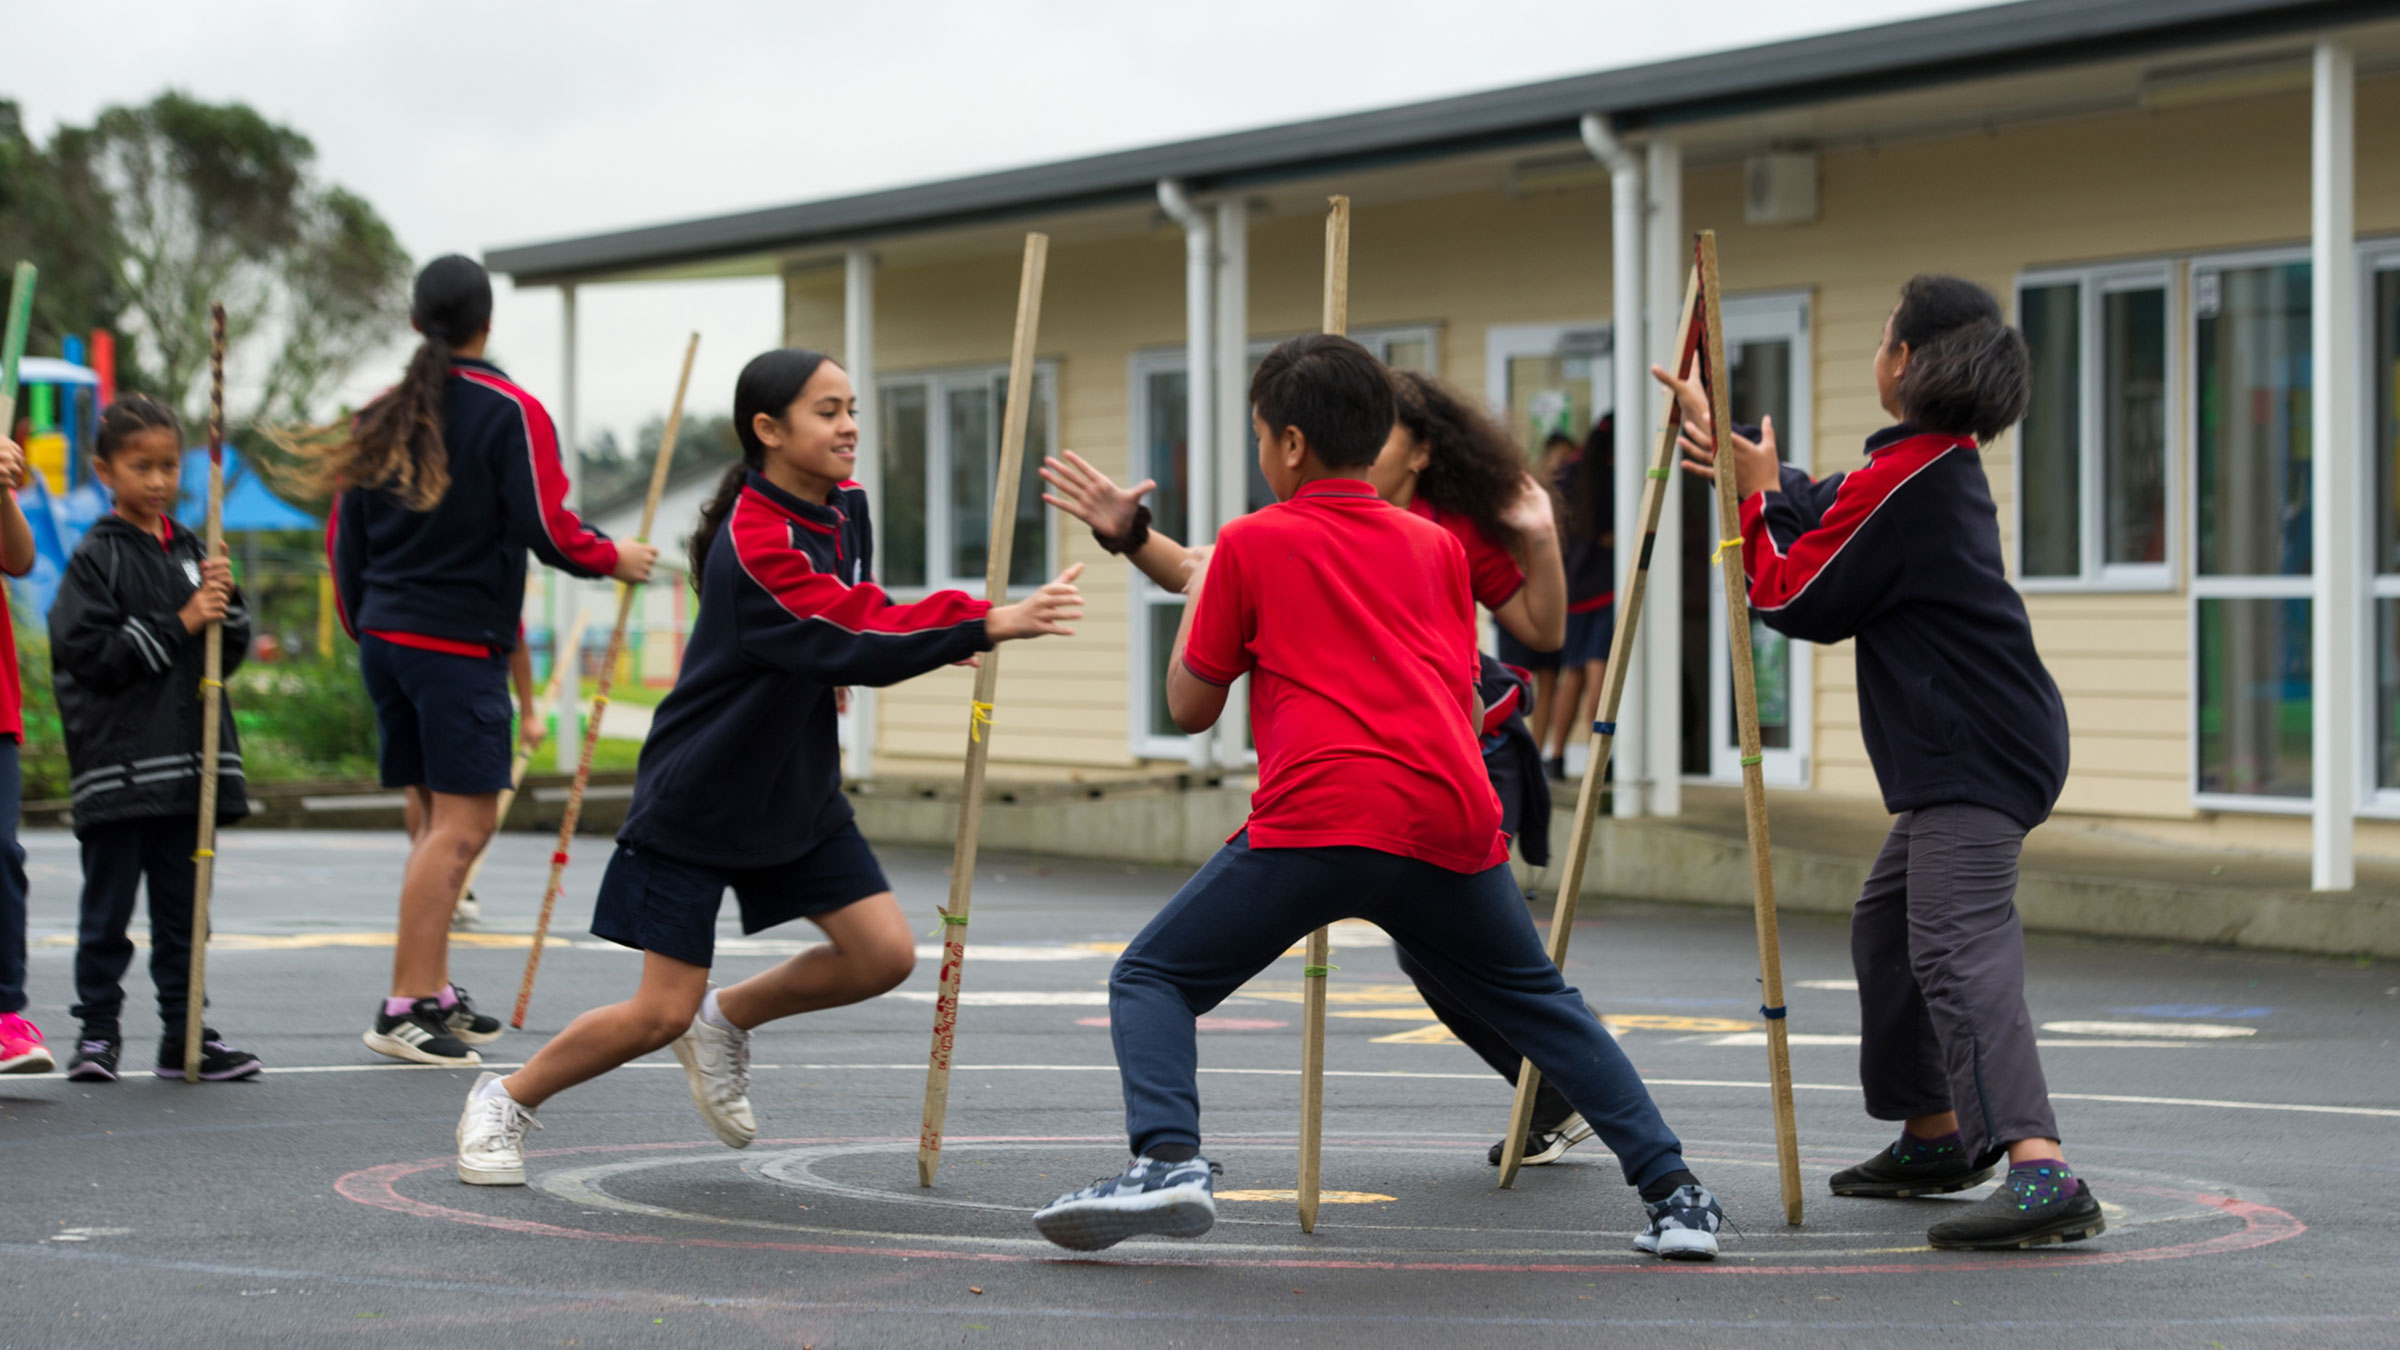 Students playing a game with rākau.